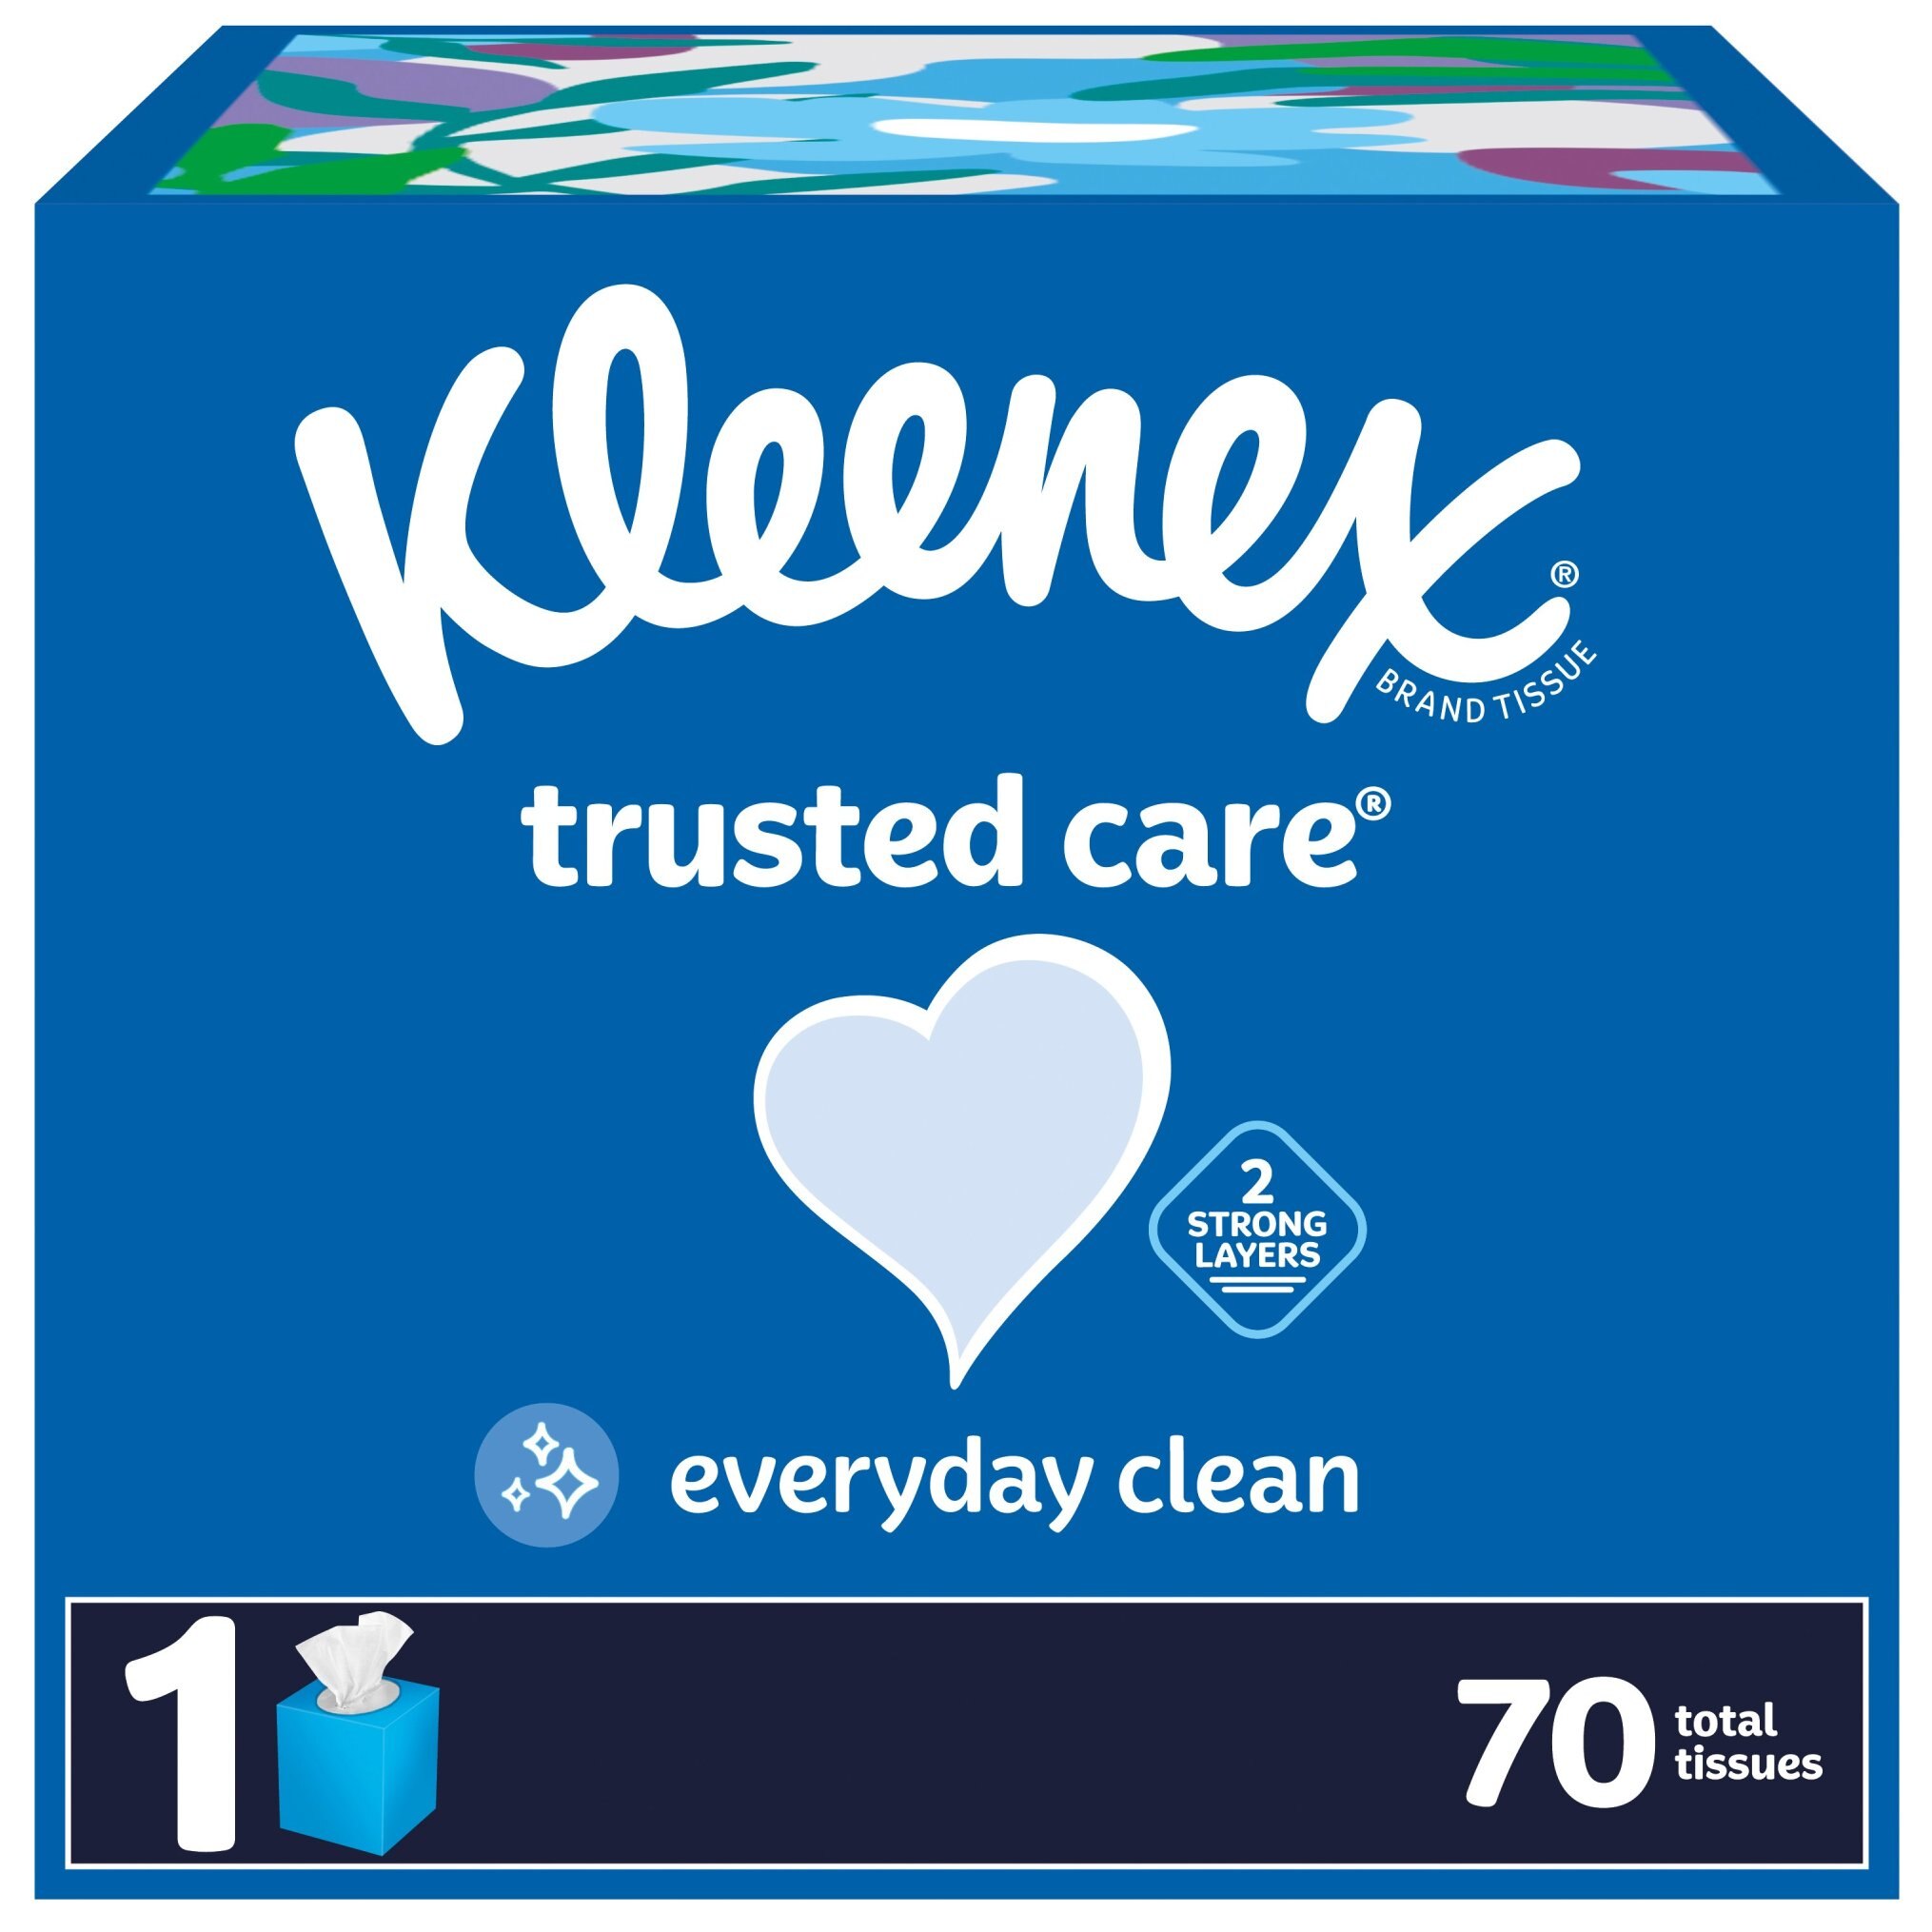 Kleenex Trusted Care Facial Tissues, 1 Cube Box, 70 Tissues per Box, 2-Ply (70 Total Tissues)